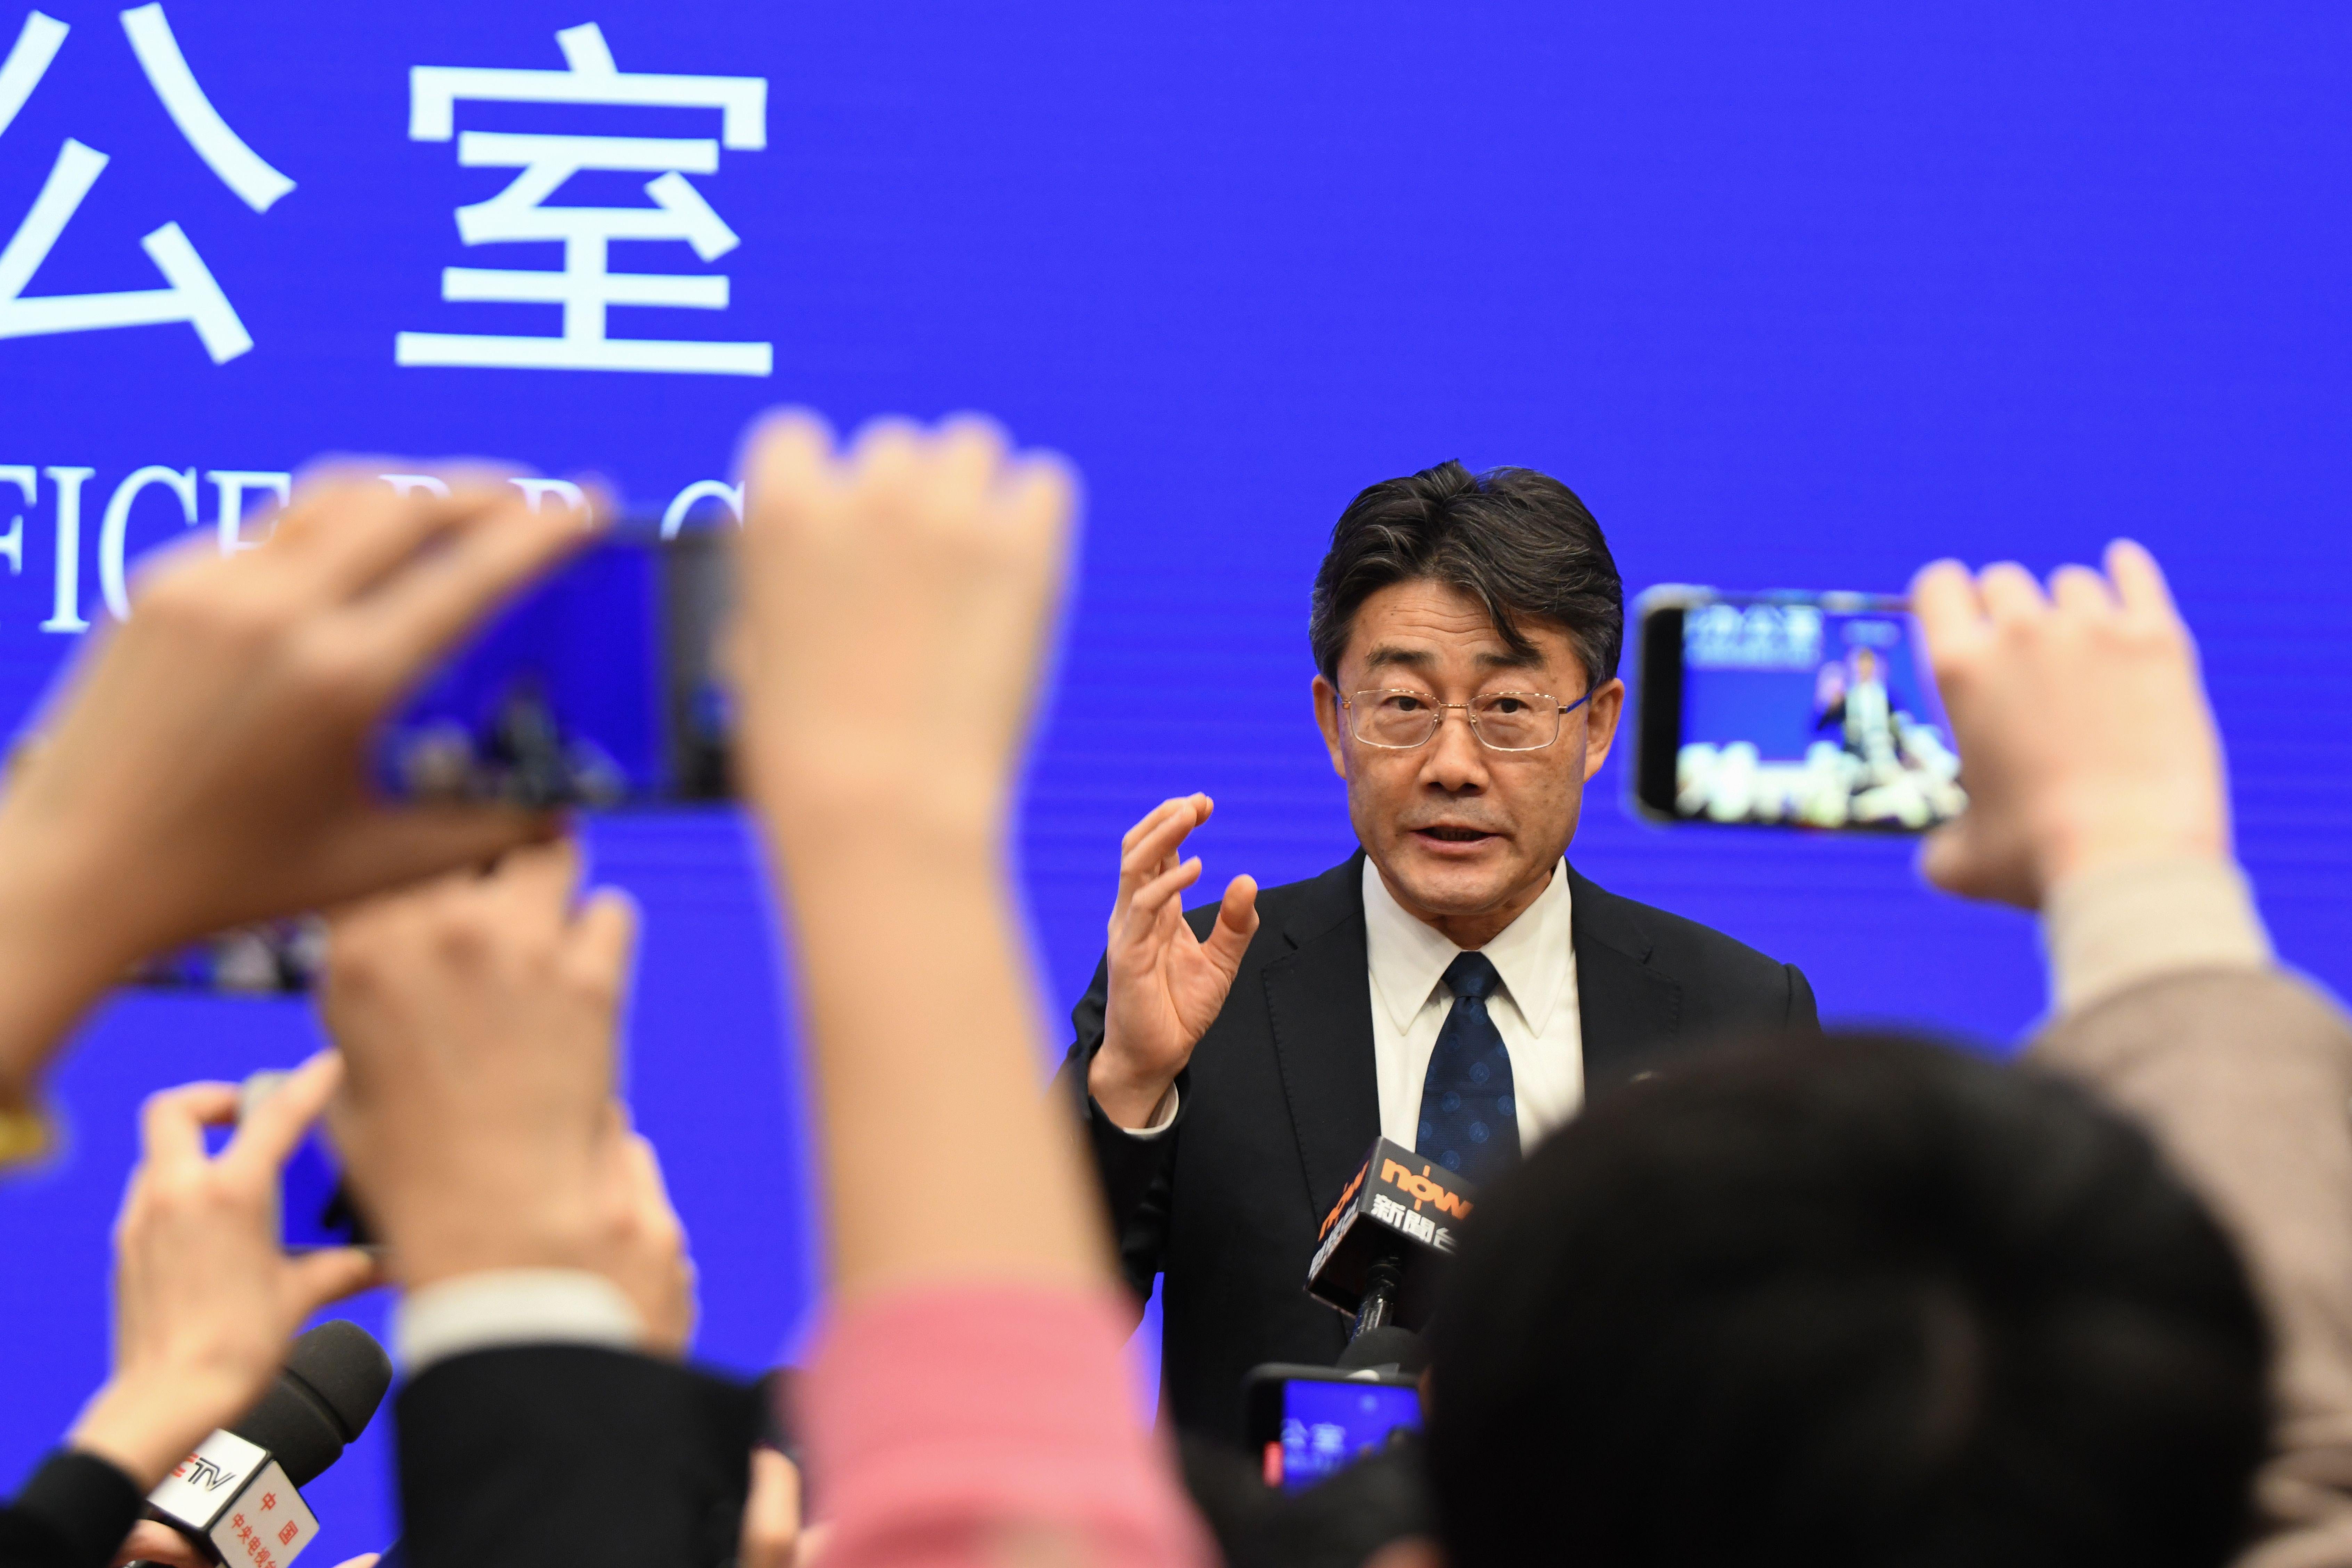 Director of the Chinese Center for Disease Control and Prevention Gao Fu speaks during a State Council Information Office press conference in Beijing on January 26, 2020.